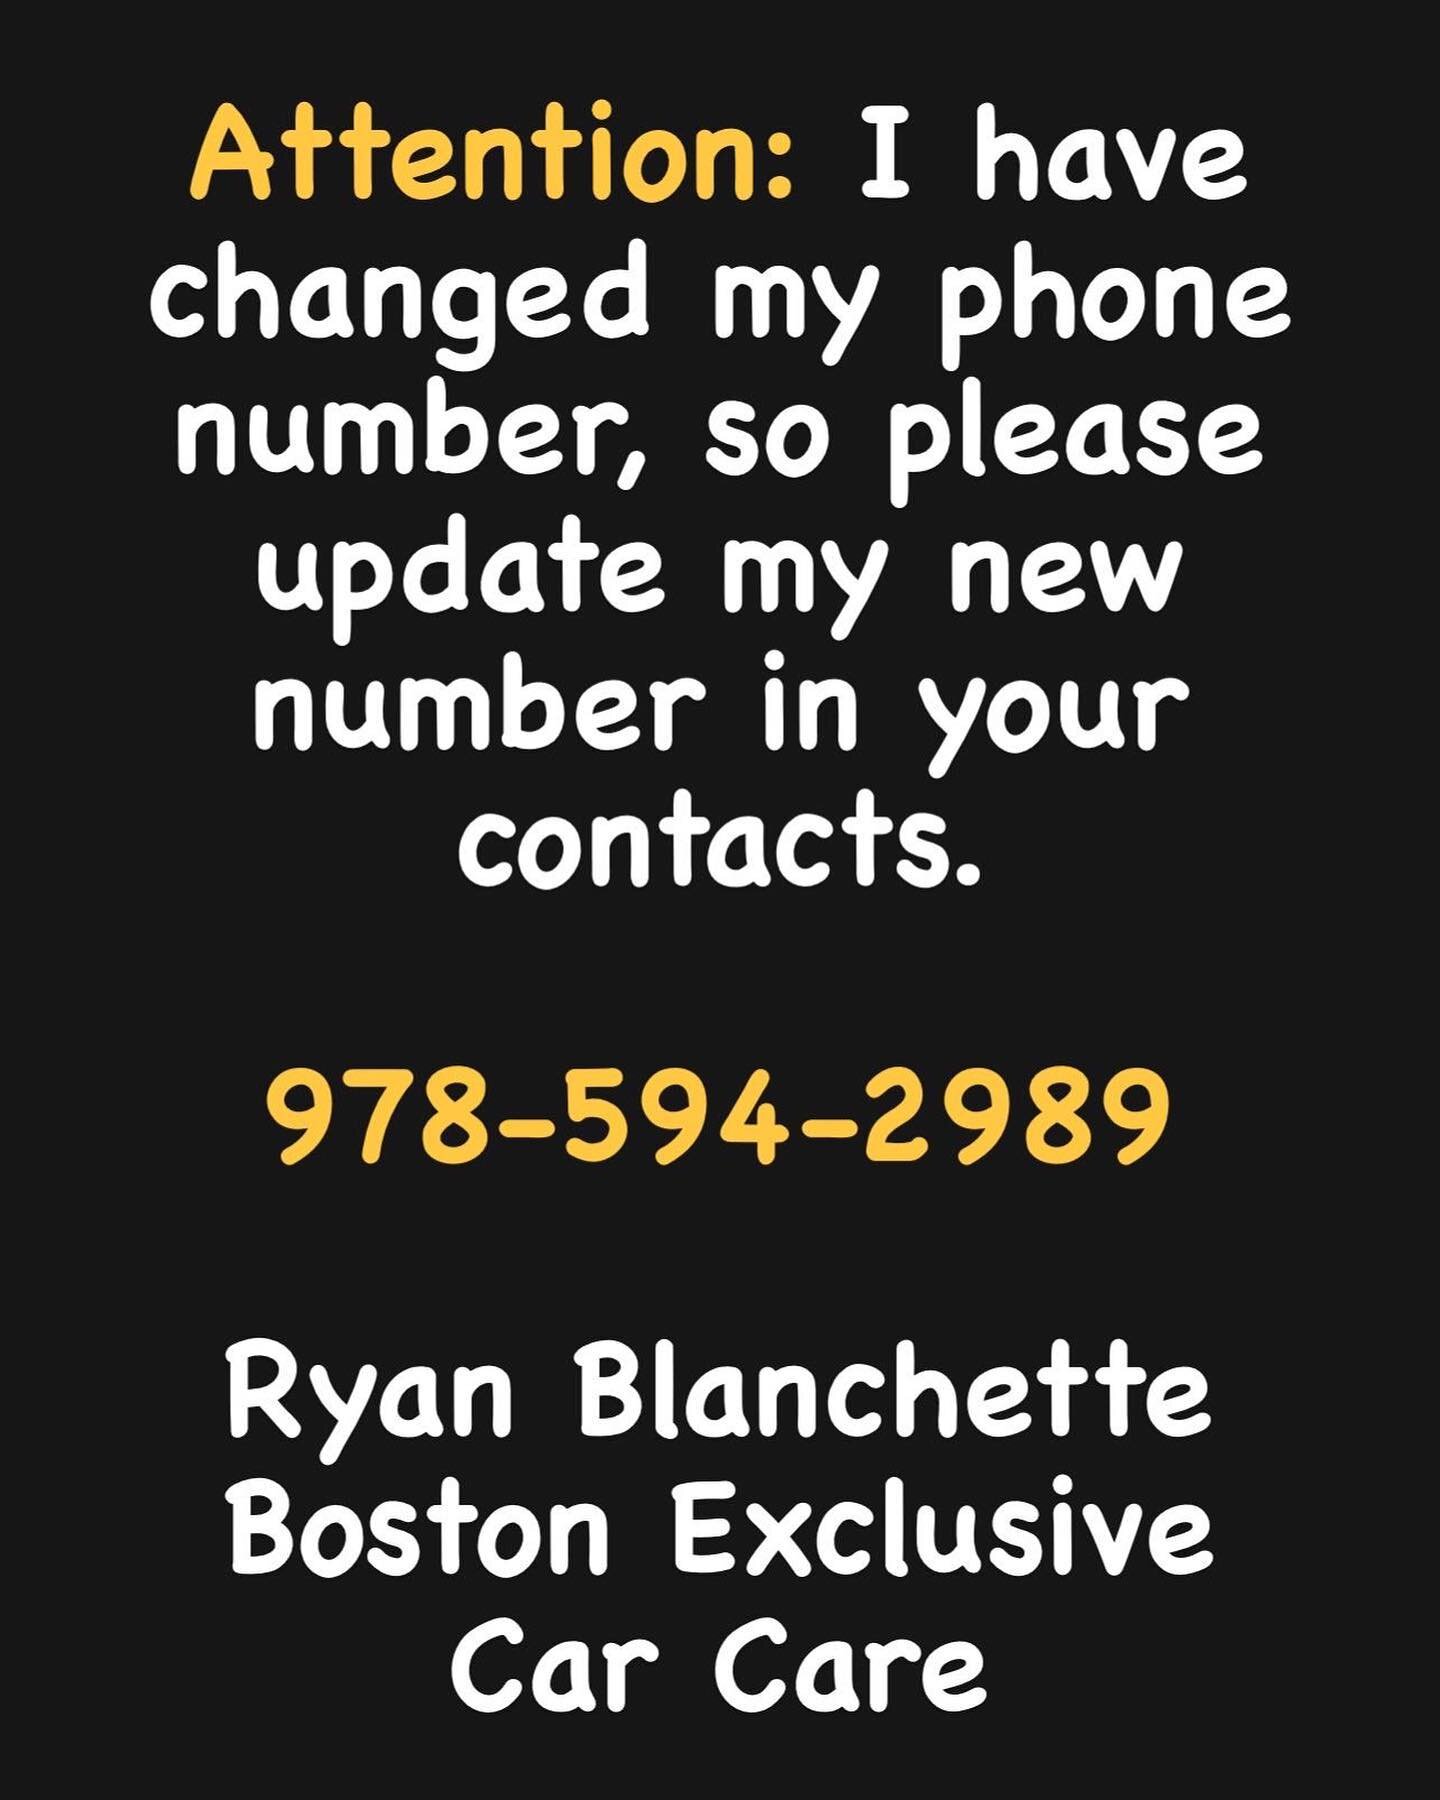 I no longer have my old numbers and have changed my new number to 978-594-2989. So please update your contacts. Thanks!